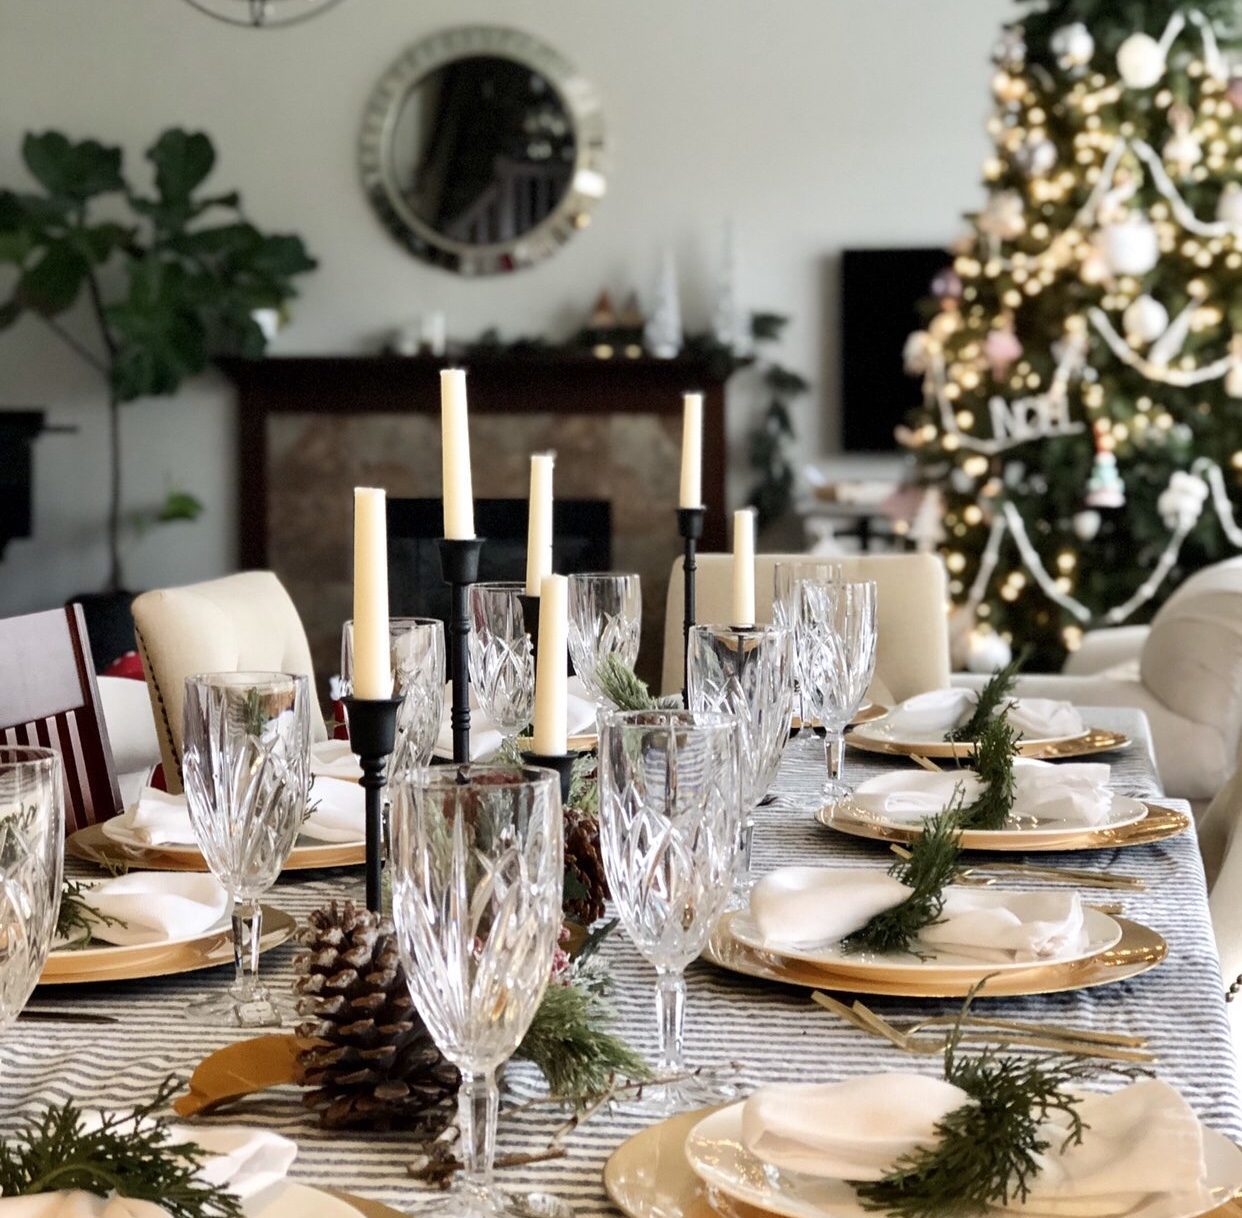 10 Tips for Hosting the Perfect Holiday Dinner Party - Inspire.Live.Love